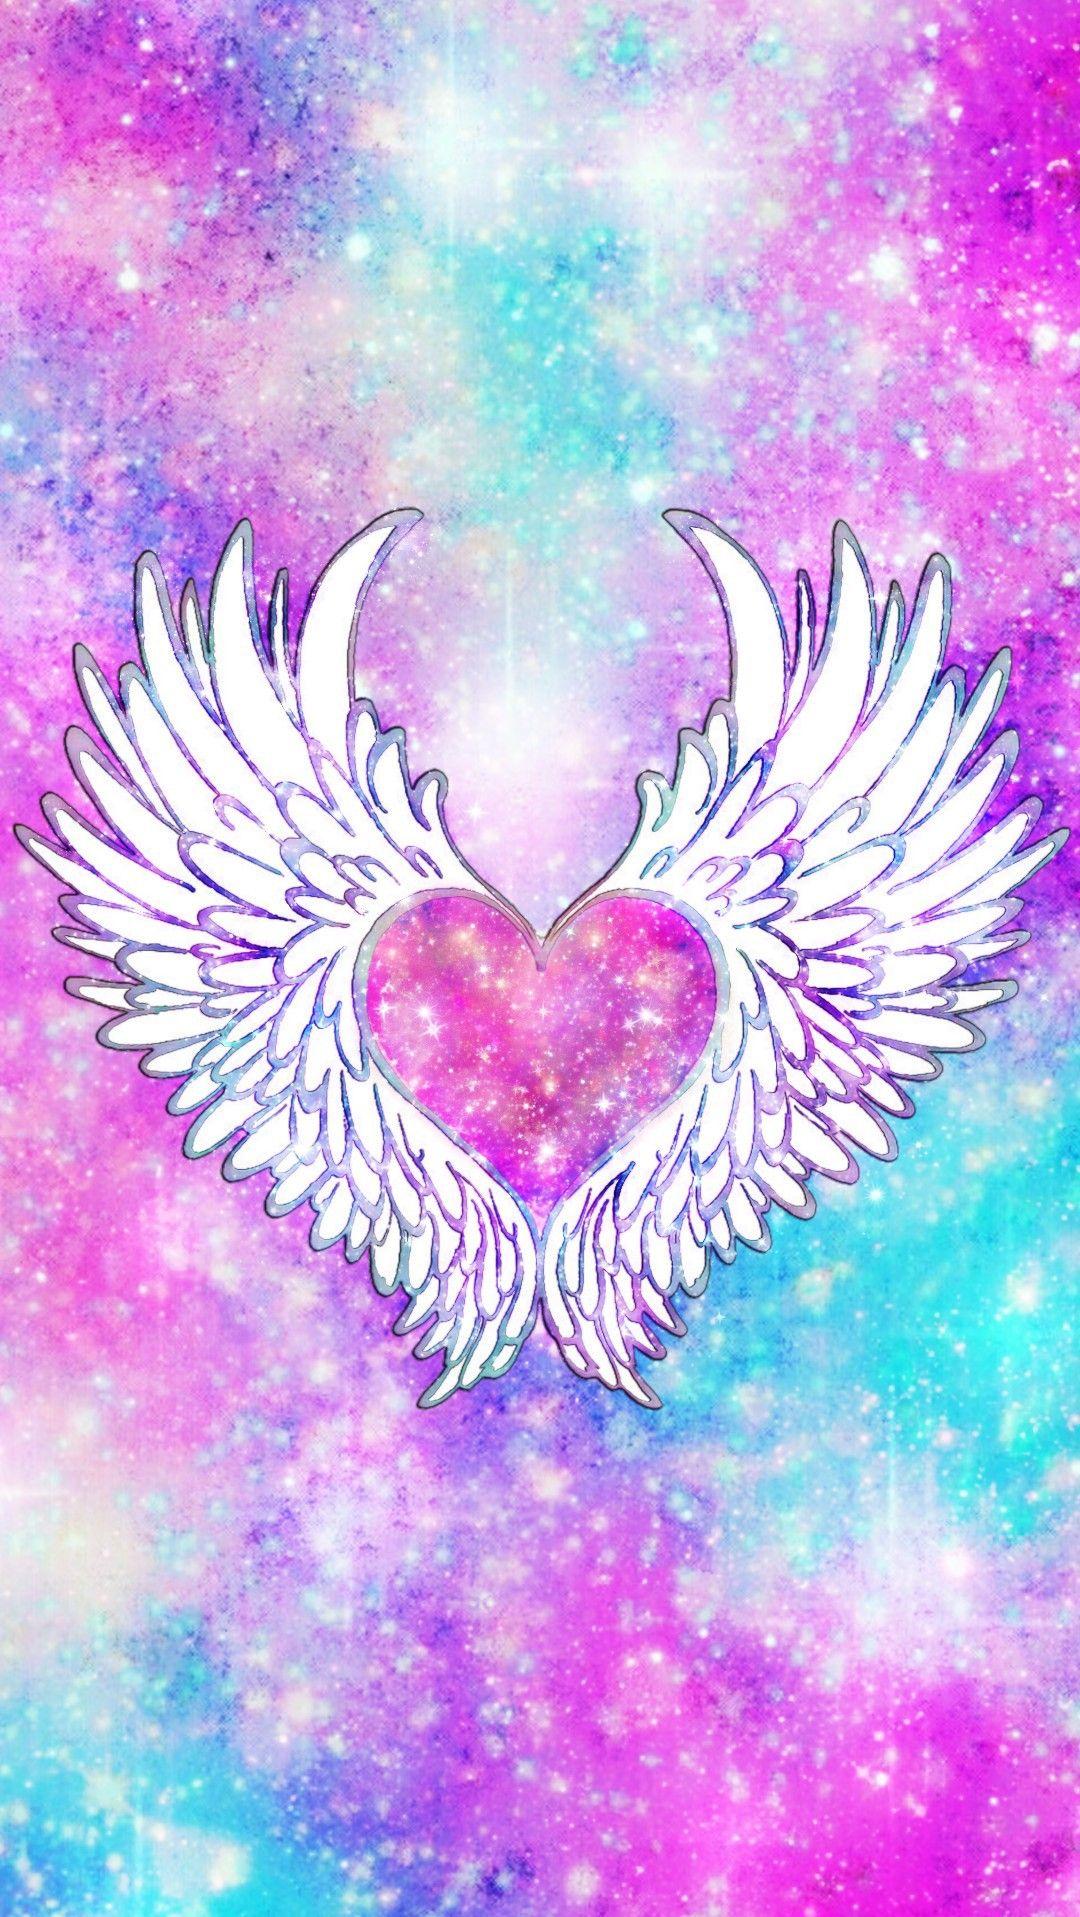 Wings Of Love Galaxy, made by me #pink #galaxy #wallpaper